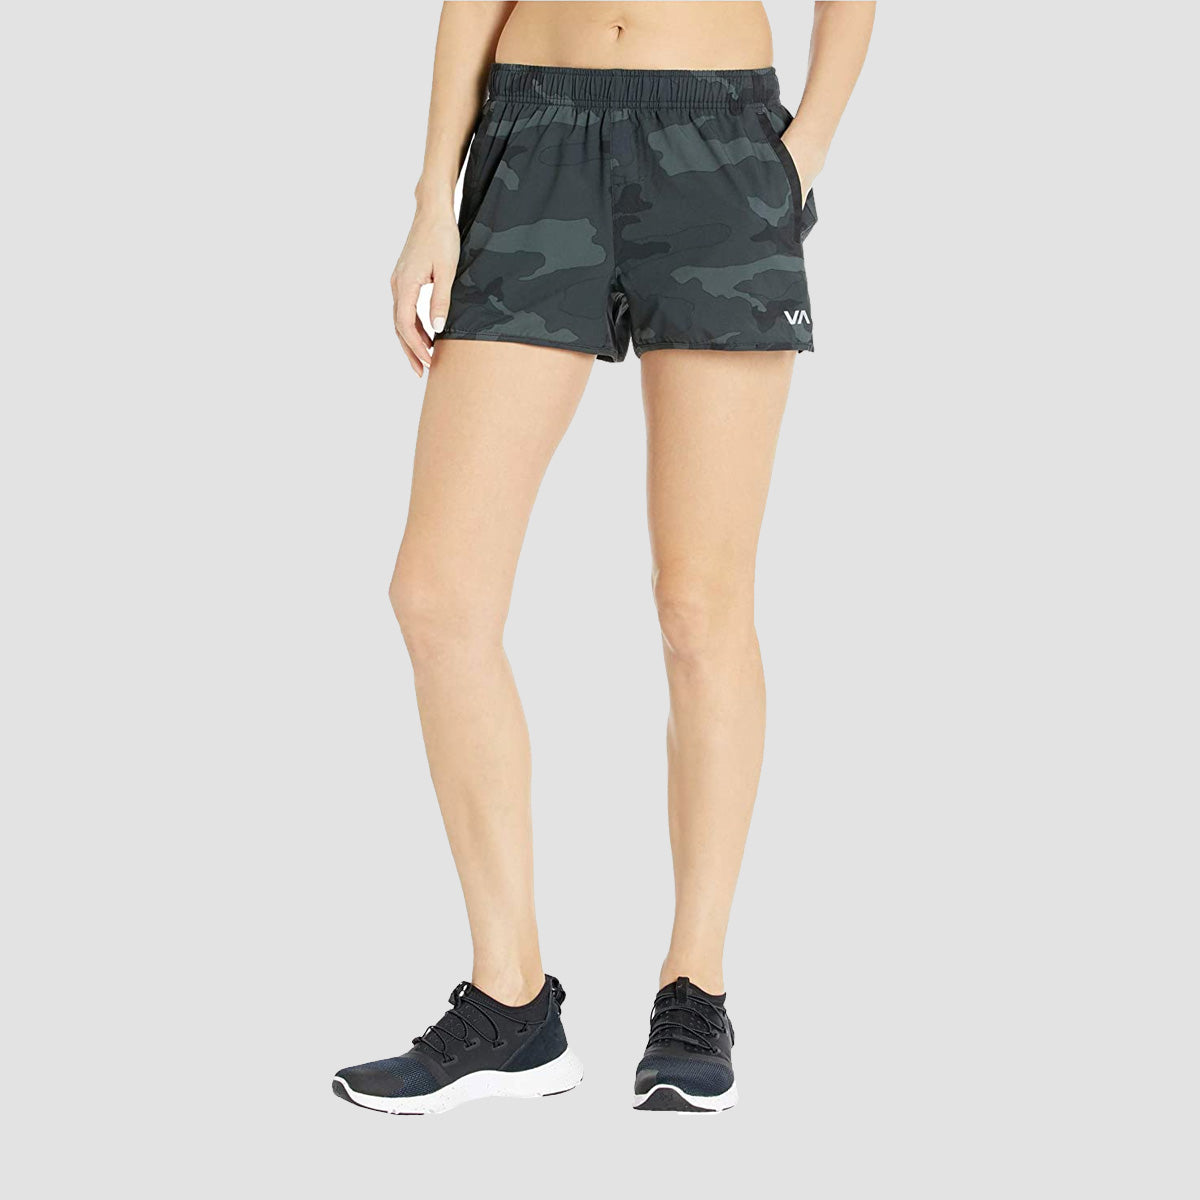 RVCA Yogger Perf Stretch Workout Shorts Camo - Womens